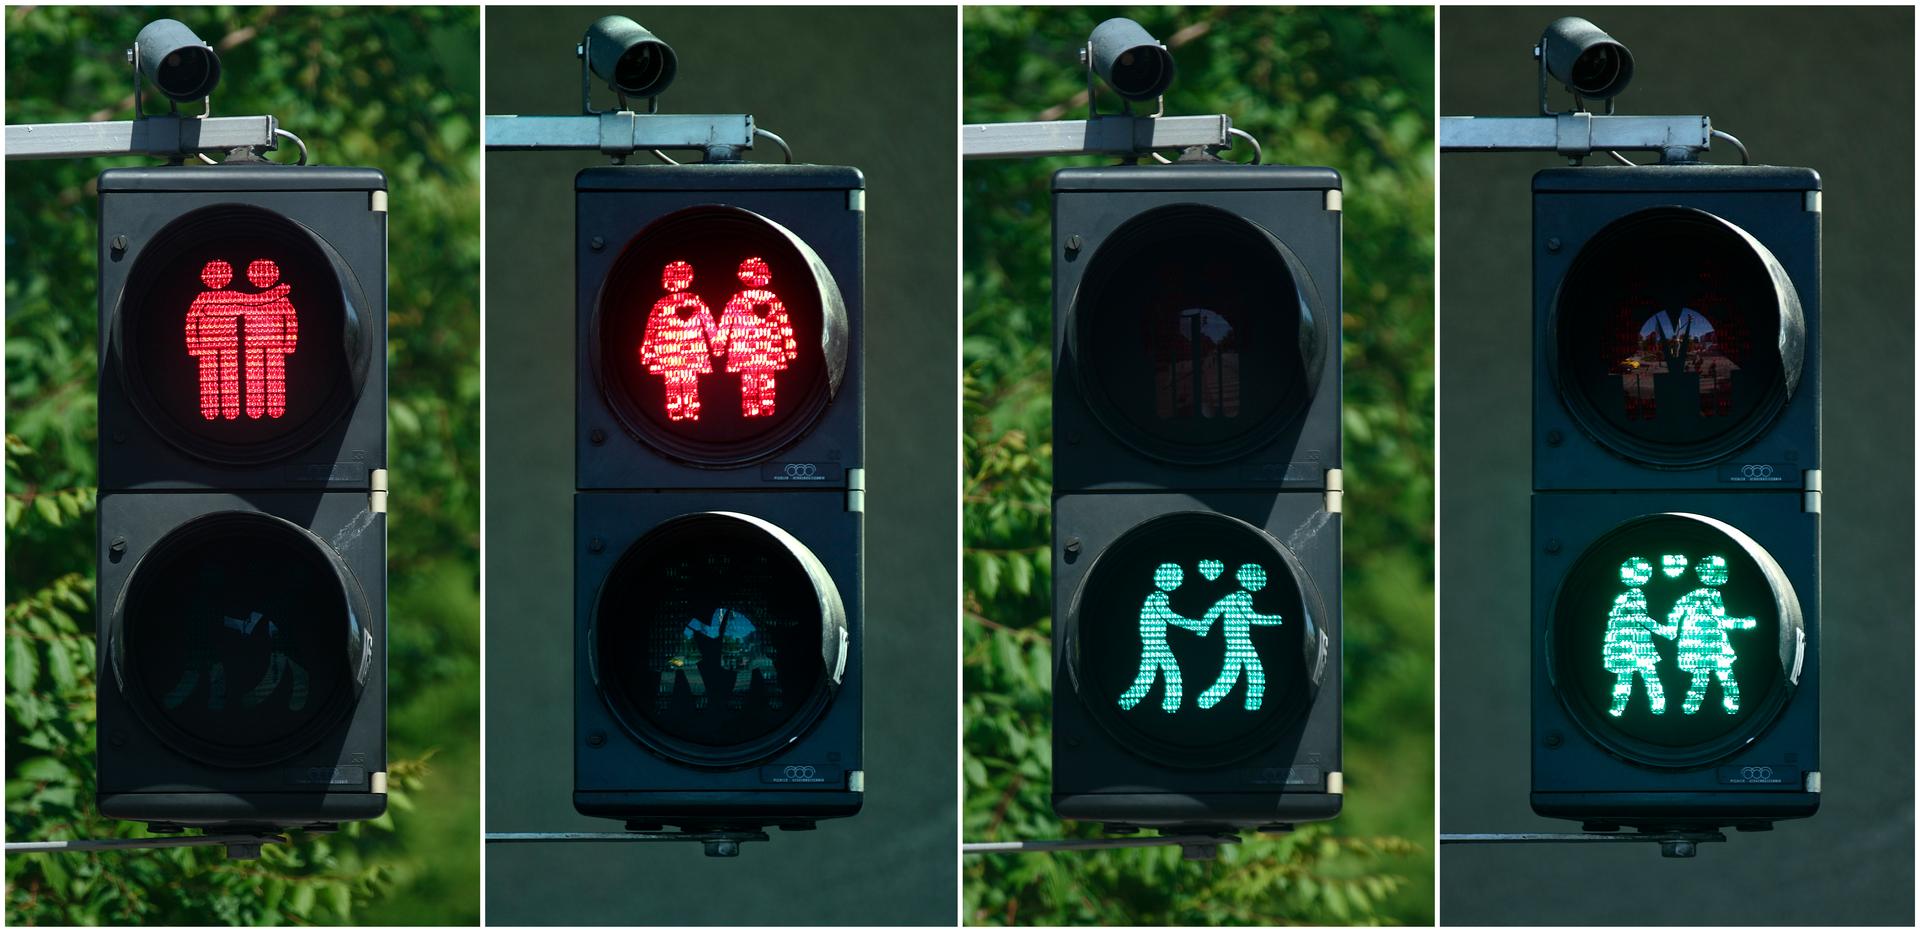 New traffic lights in Vienna show male and  female gay couples with hearts - in red for stop and green for go